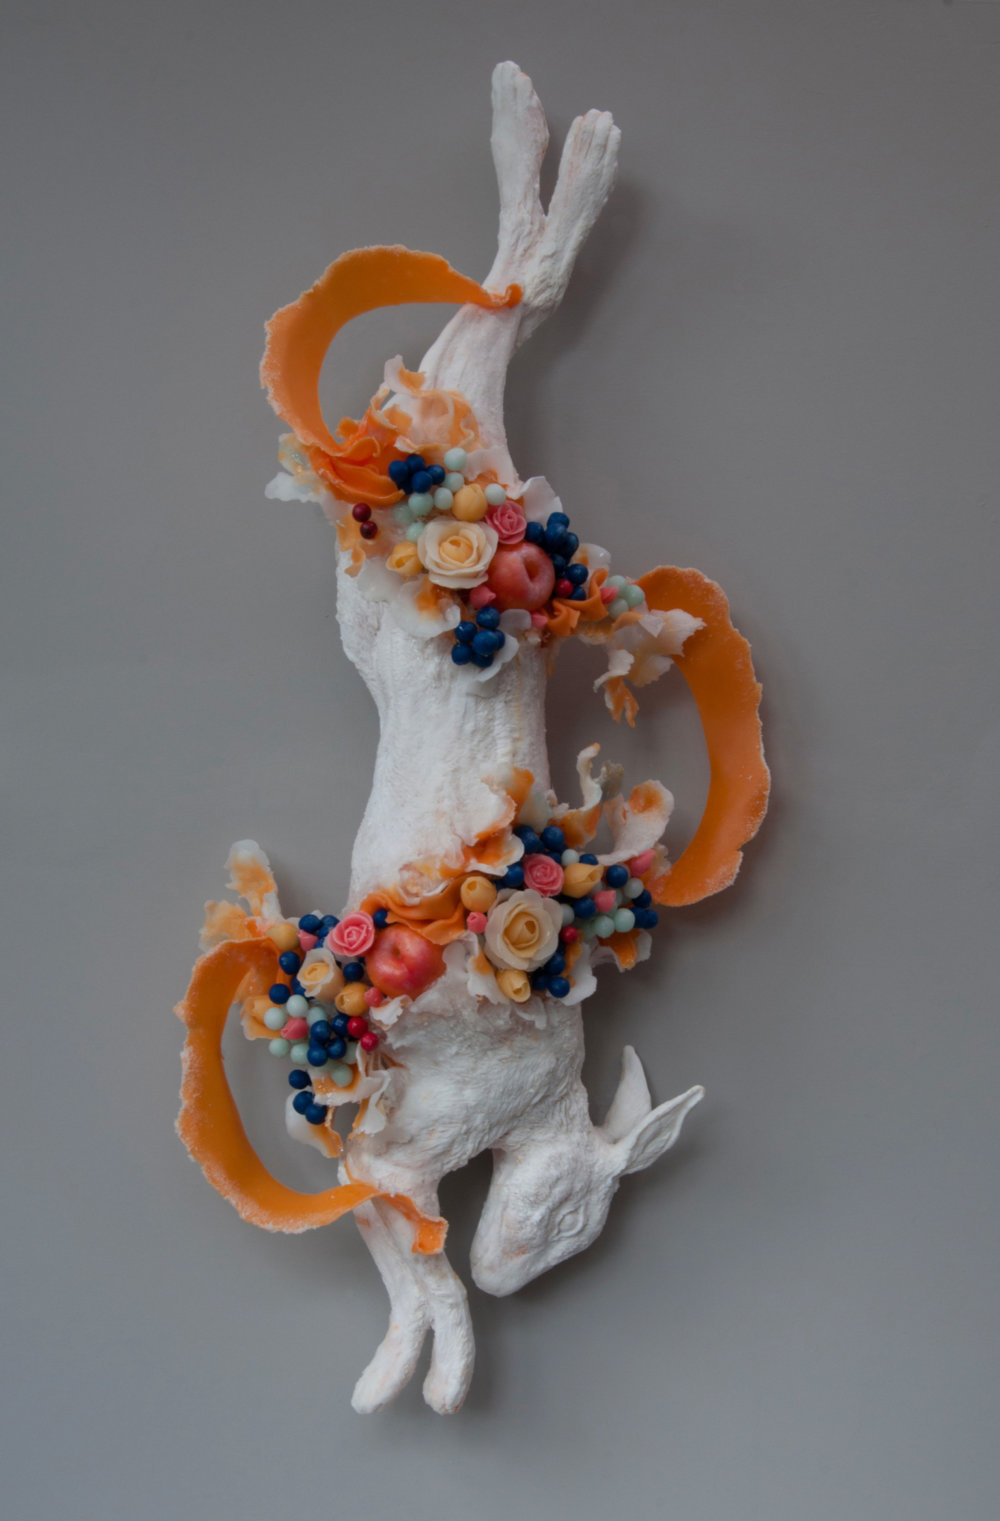 Beautifully Grotesque Disquieting Wax Sculptures Flower Decorated By Rebecca Stevenson 2